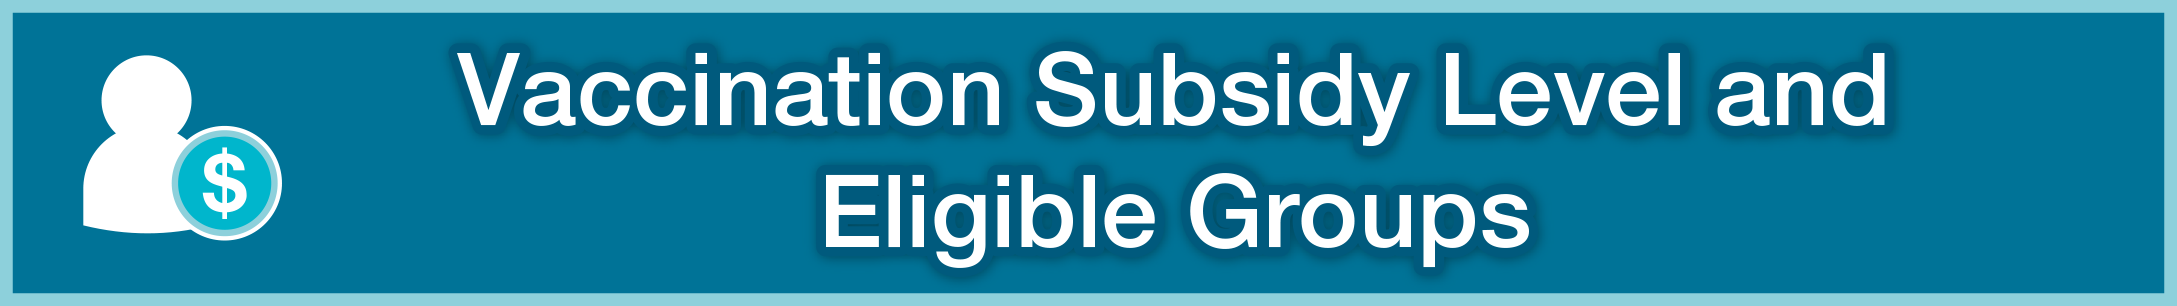 Vaccination Subsidy Level and Eligible Groups